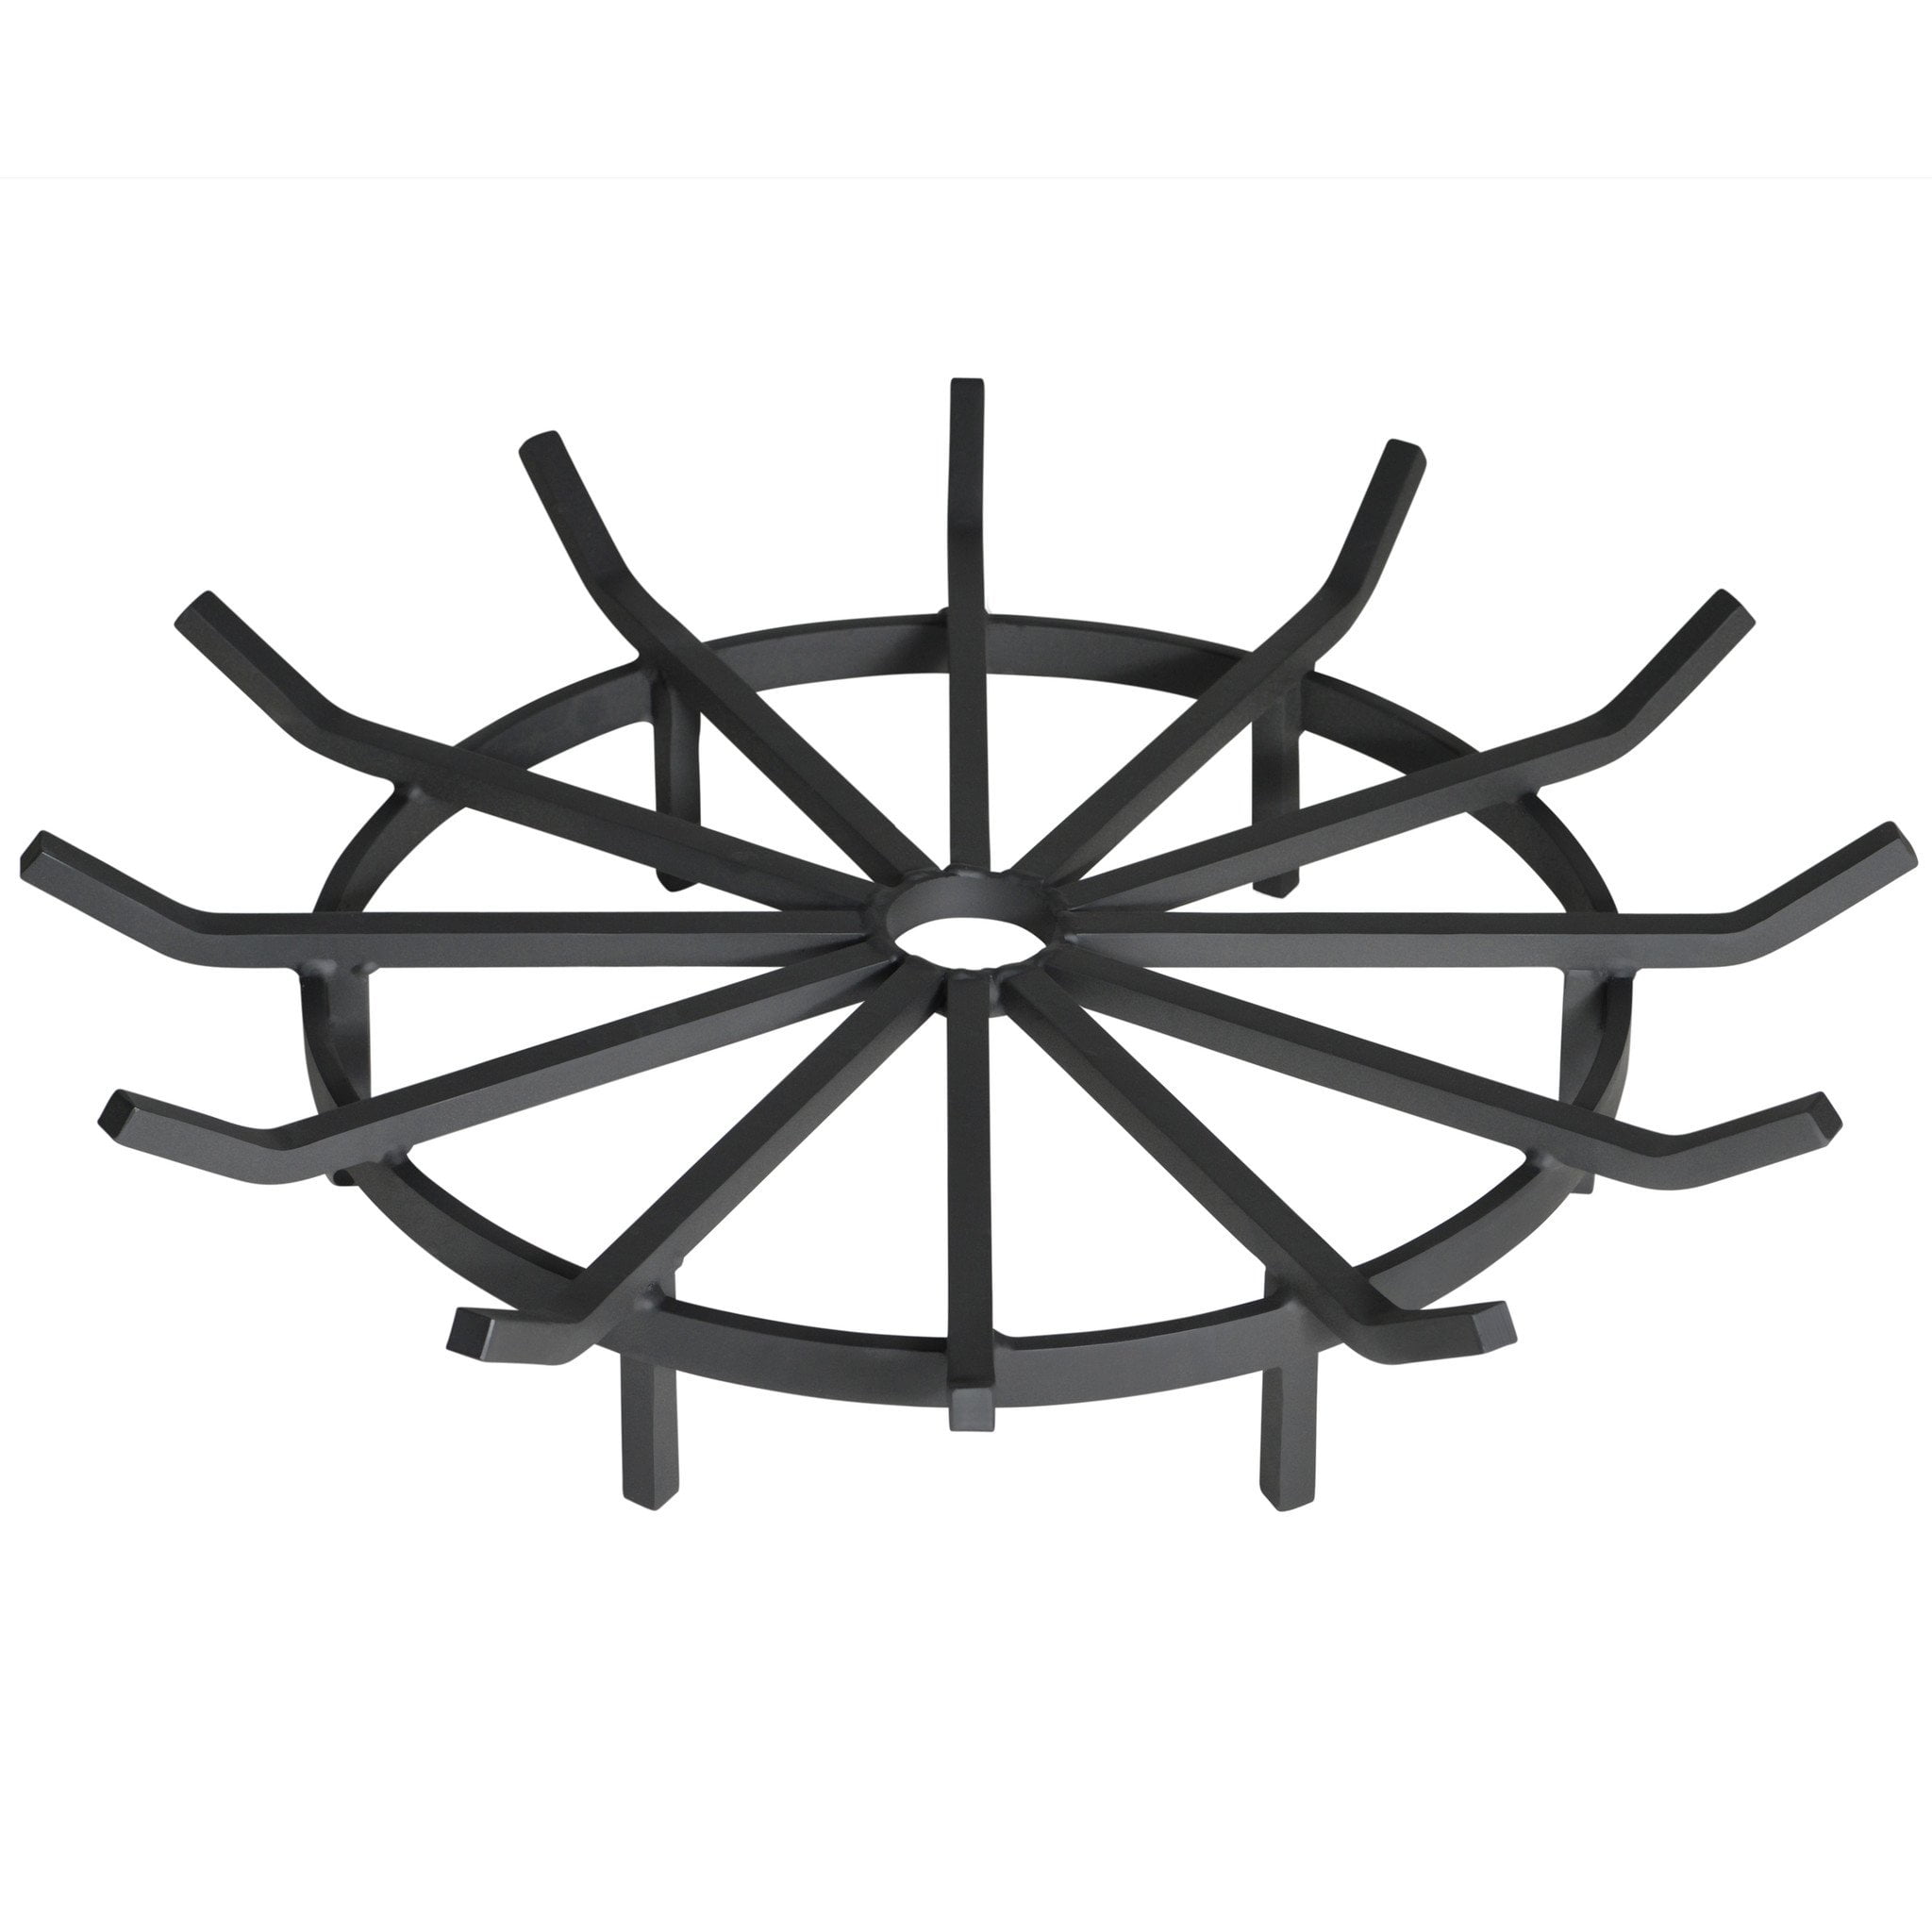 Wagon Wheel Fire Pit Grate Made, Fire Pit Made In Usa